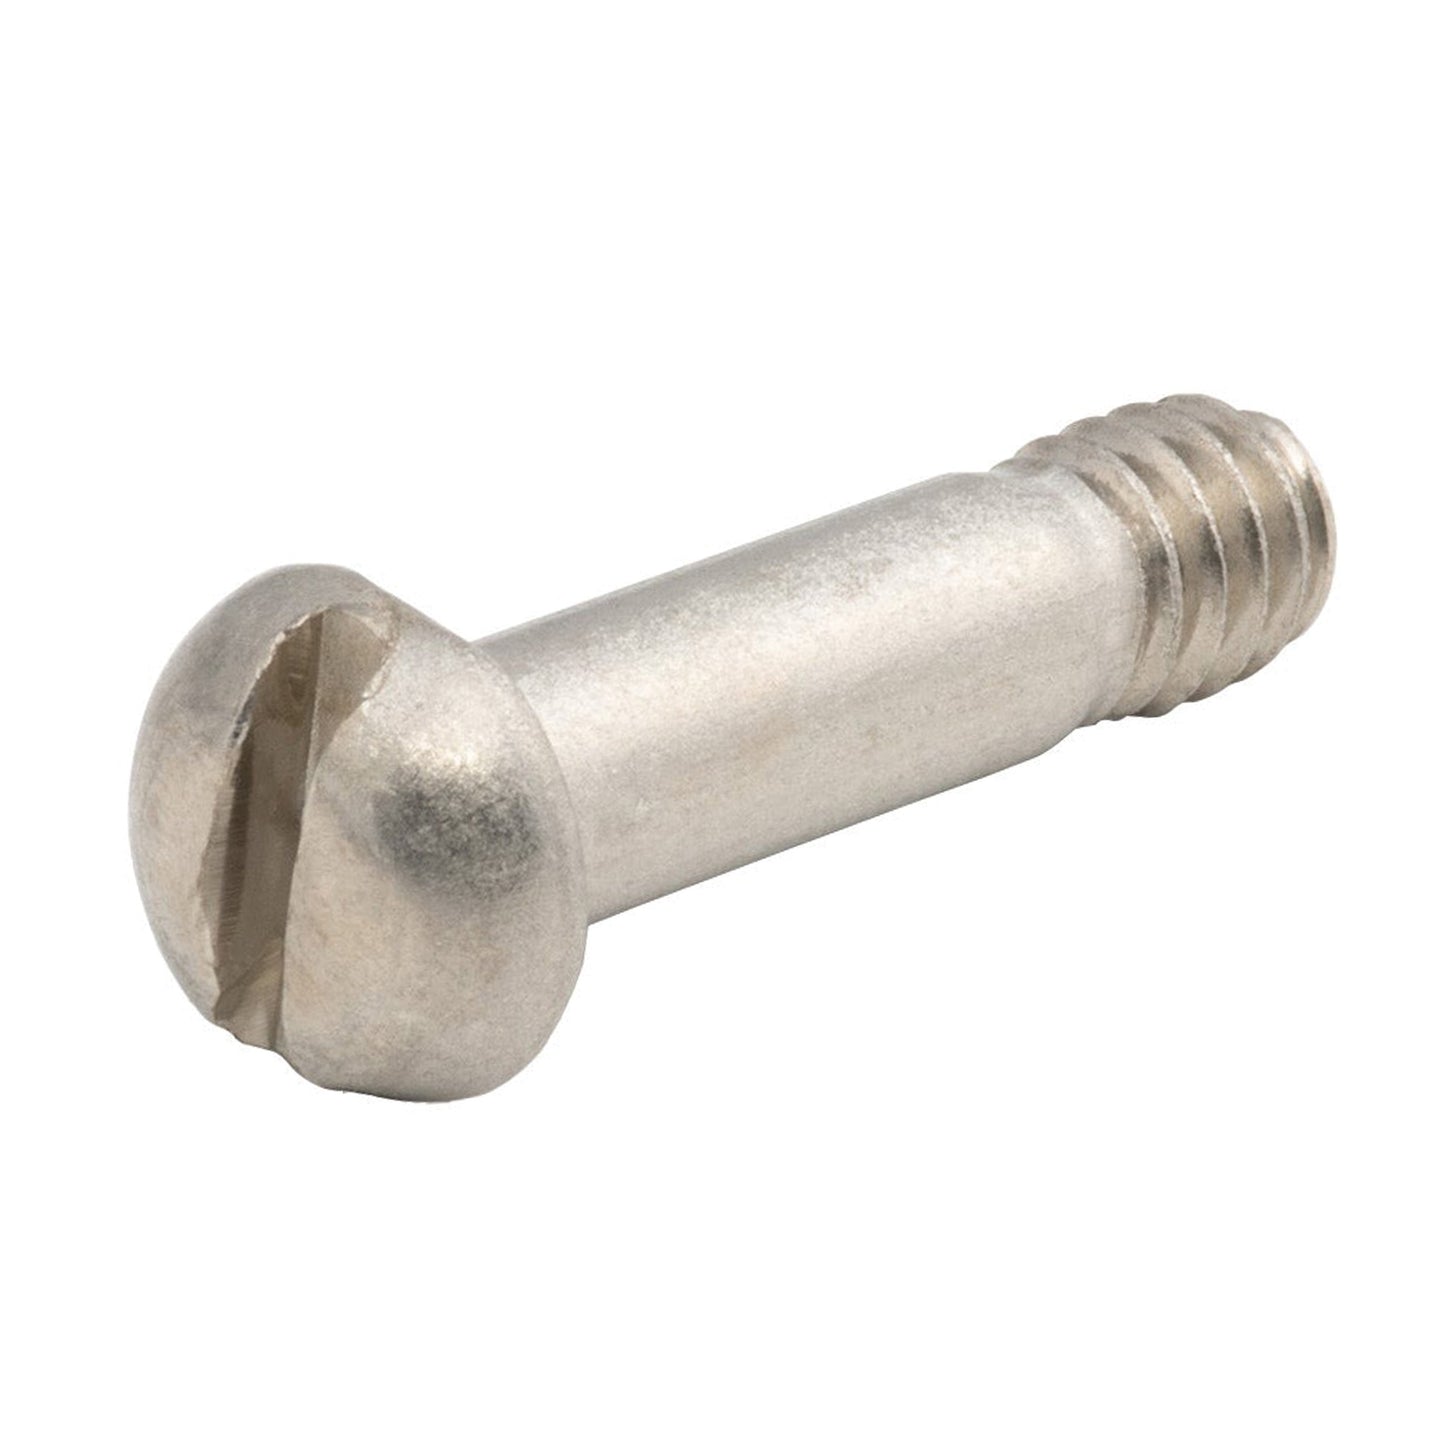 Replacement Bolt For All Nylon Deck Hinges